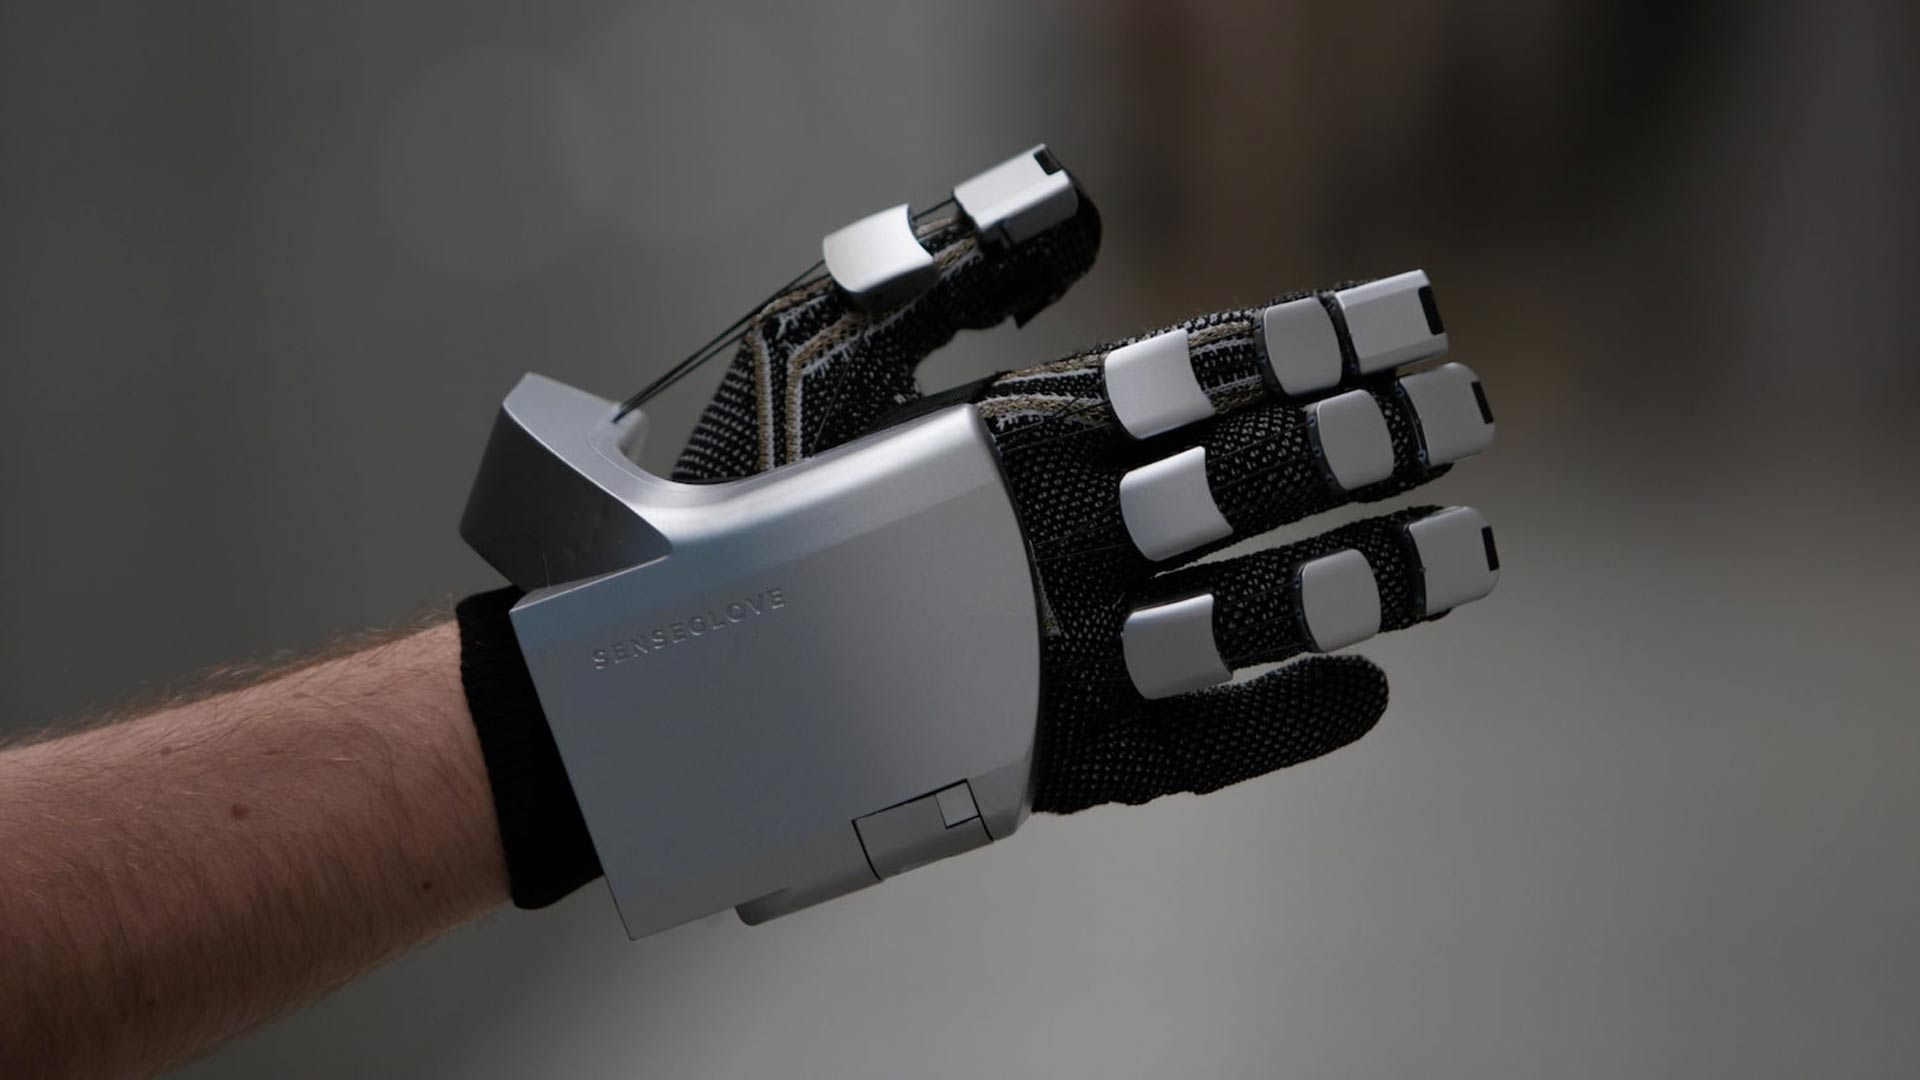 SenseGlove Raises €3.25M in Series A Funding Round to Advance VR Haptic Gloves – Road to VR